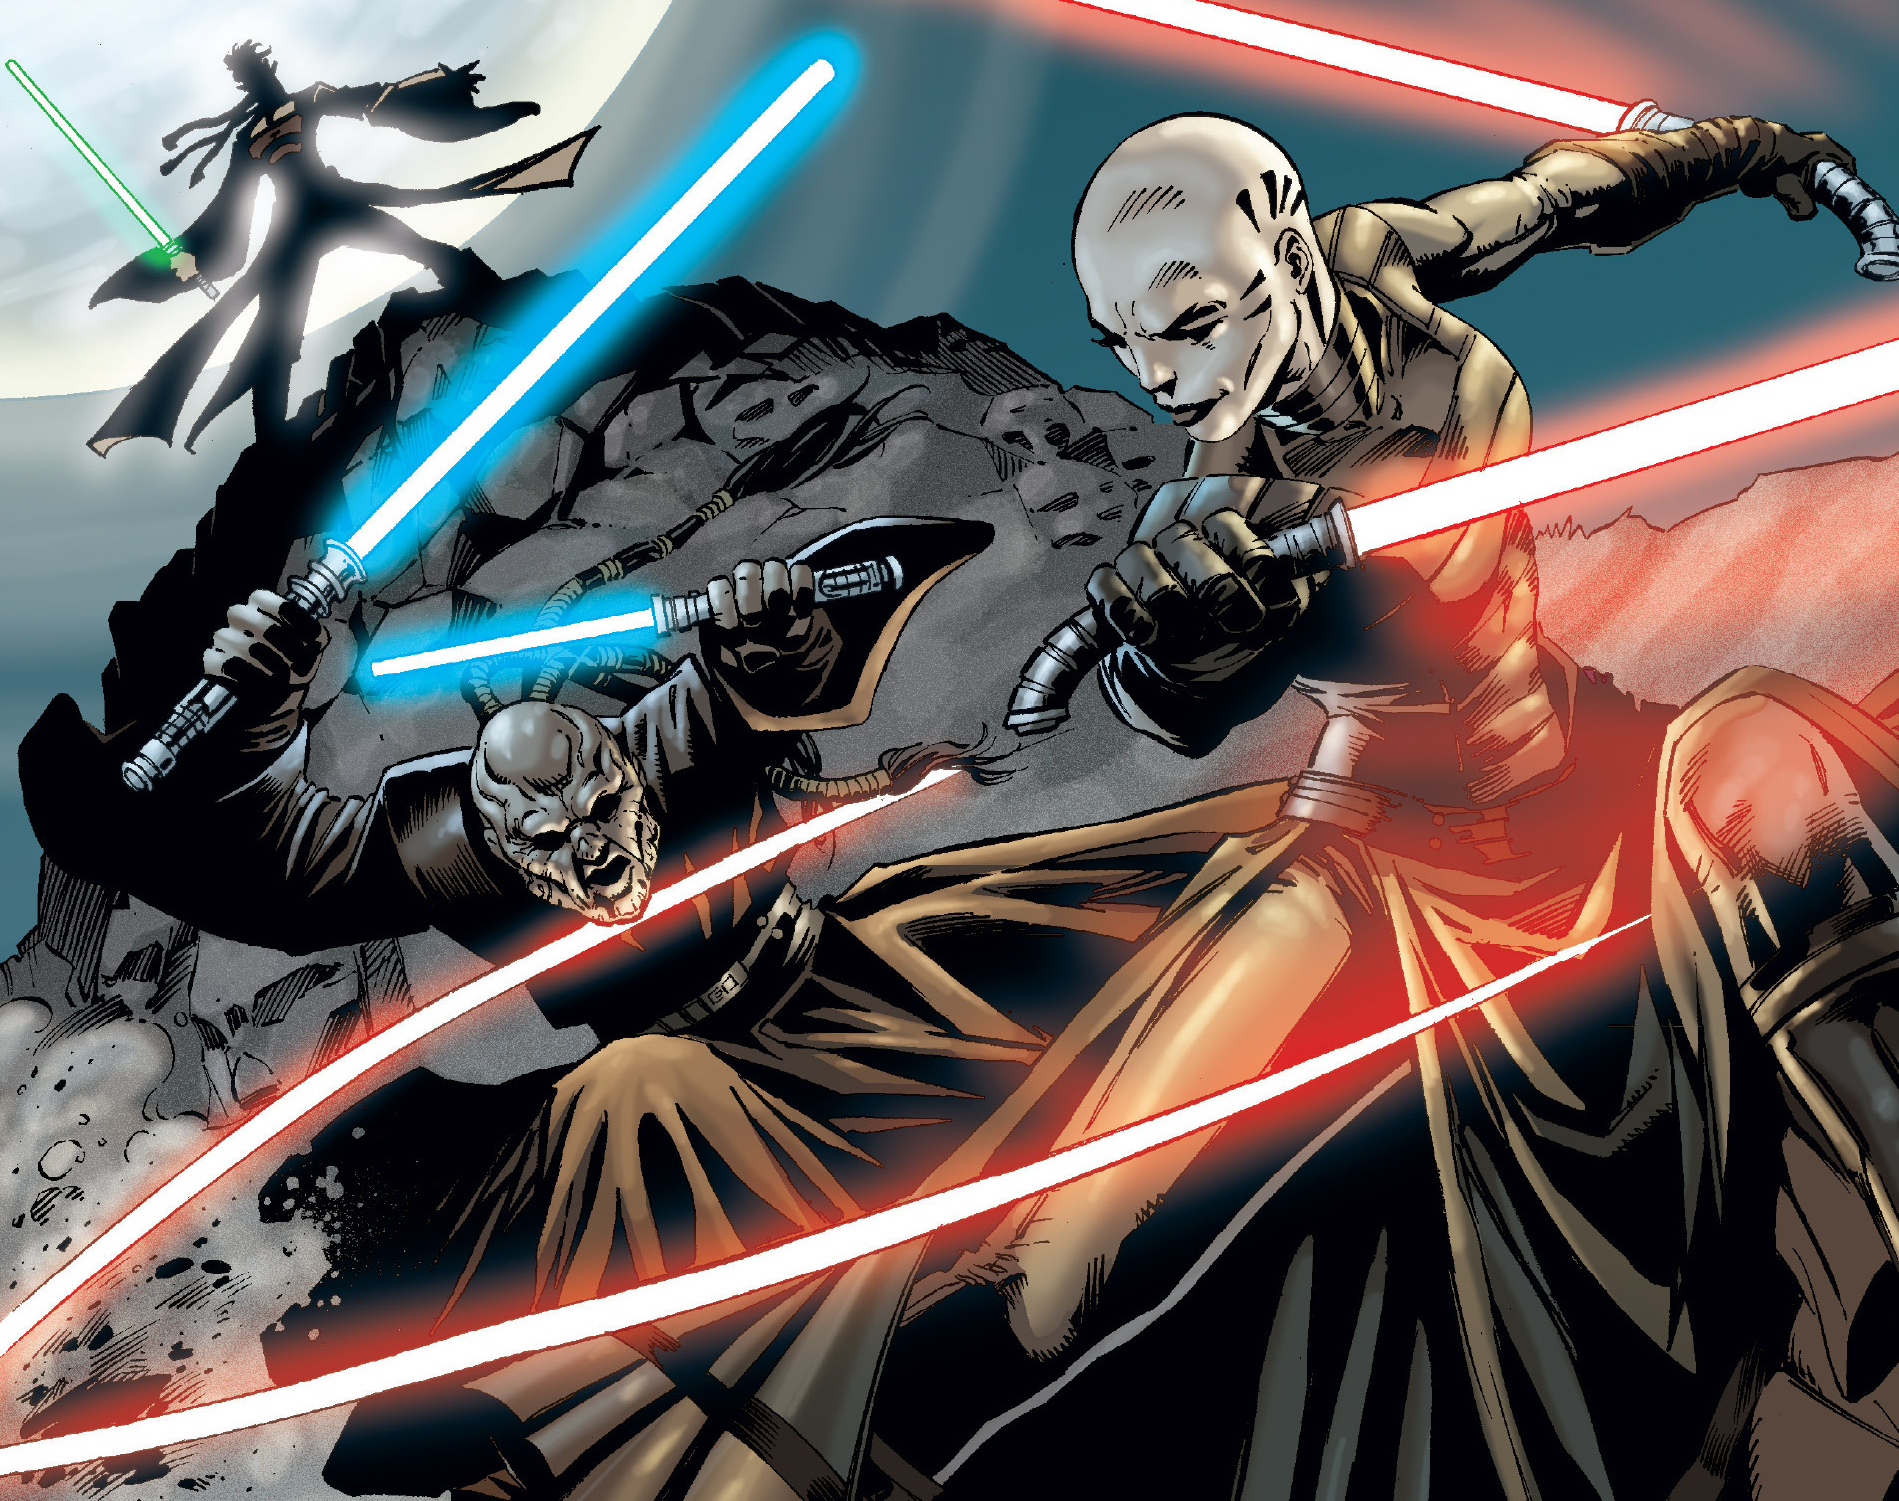 kotor 2 dueling or two weapon